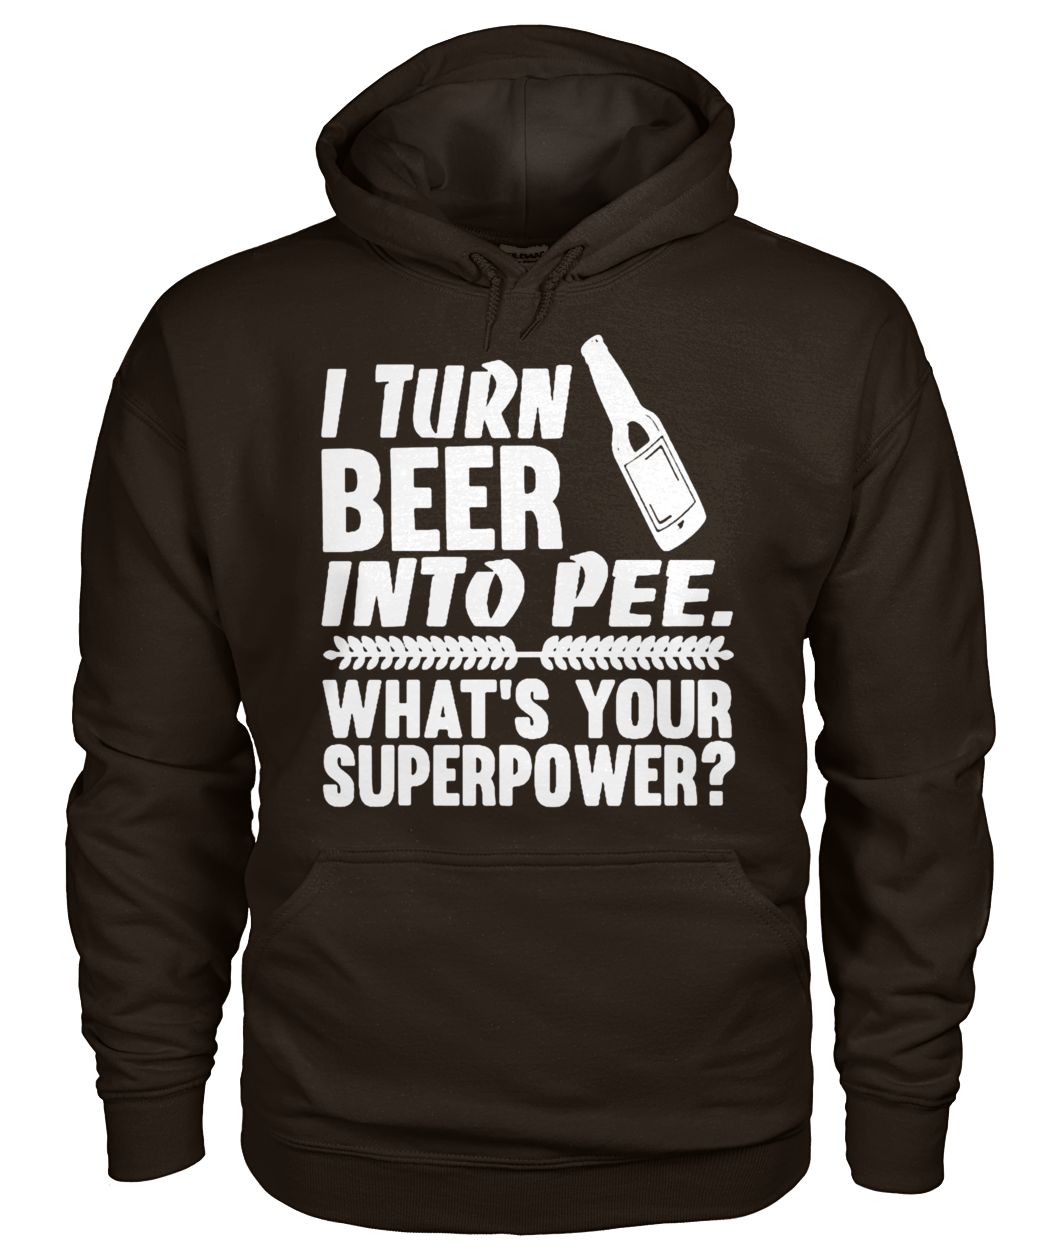 I turn beer into pee what's your supperpower gildan hoodie